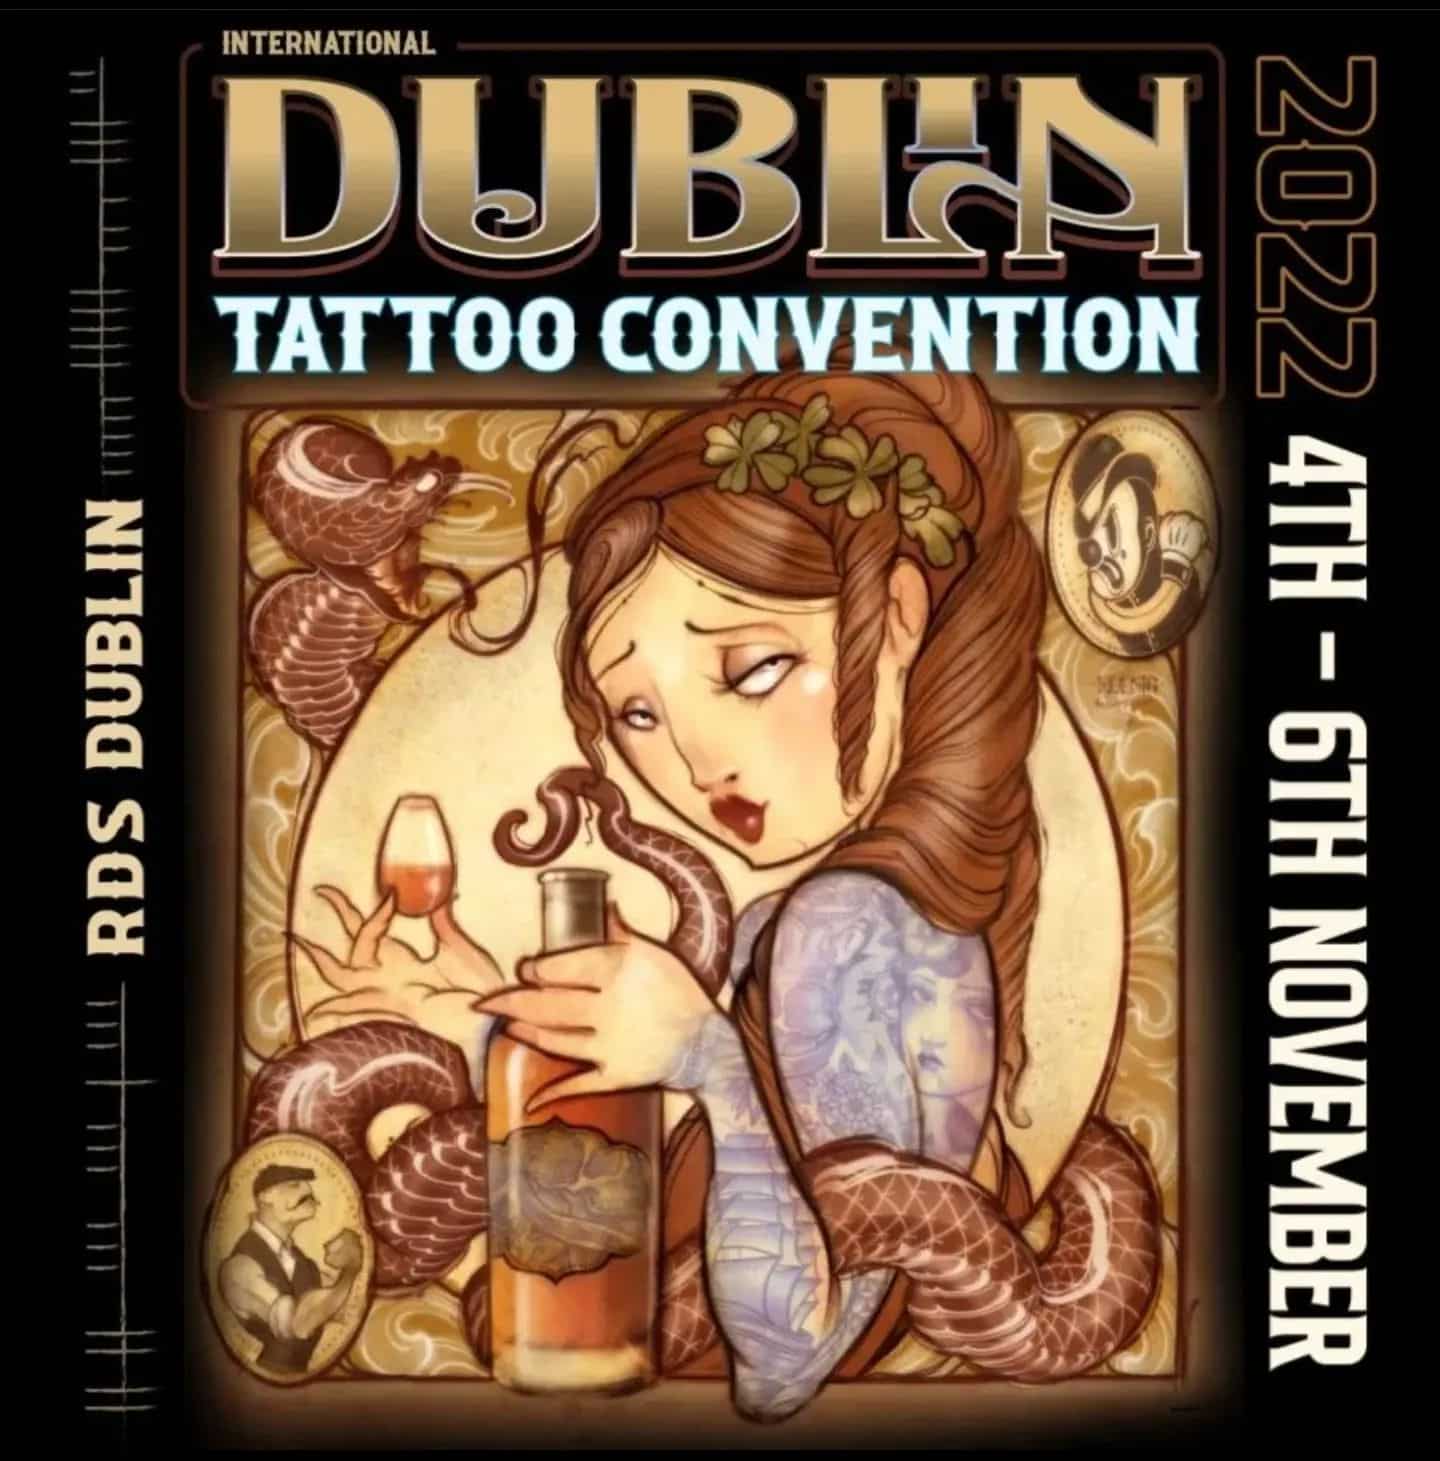 Dublin!!! We are in ya!!!!!
Looking forward to the weekend ahead, couple of wee gaps left with Noemi... the flash sheets will be on the table I'd you want to try your luck with a walk up, otherwise limited availability on the Saturday afternoon. 
Send a wee DM if you would like to prebook!

dublintattooconvention   
 